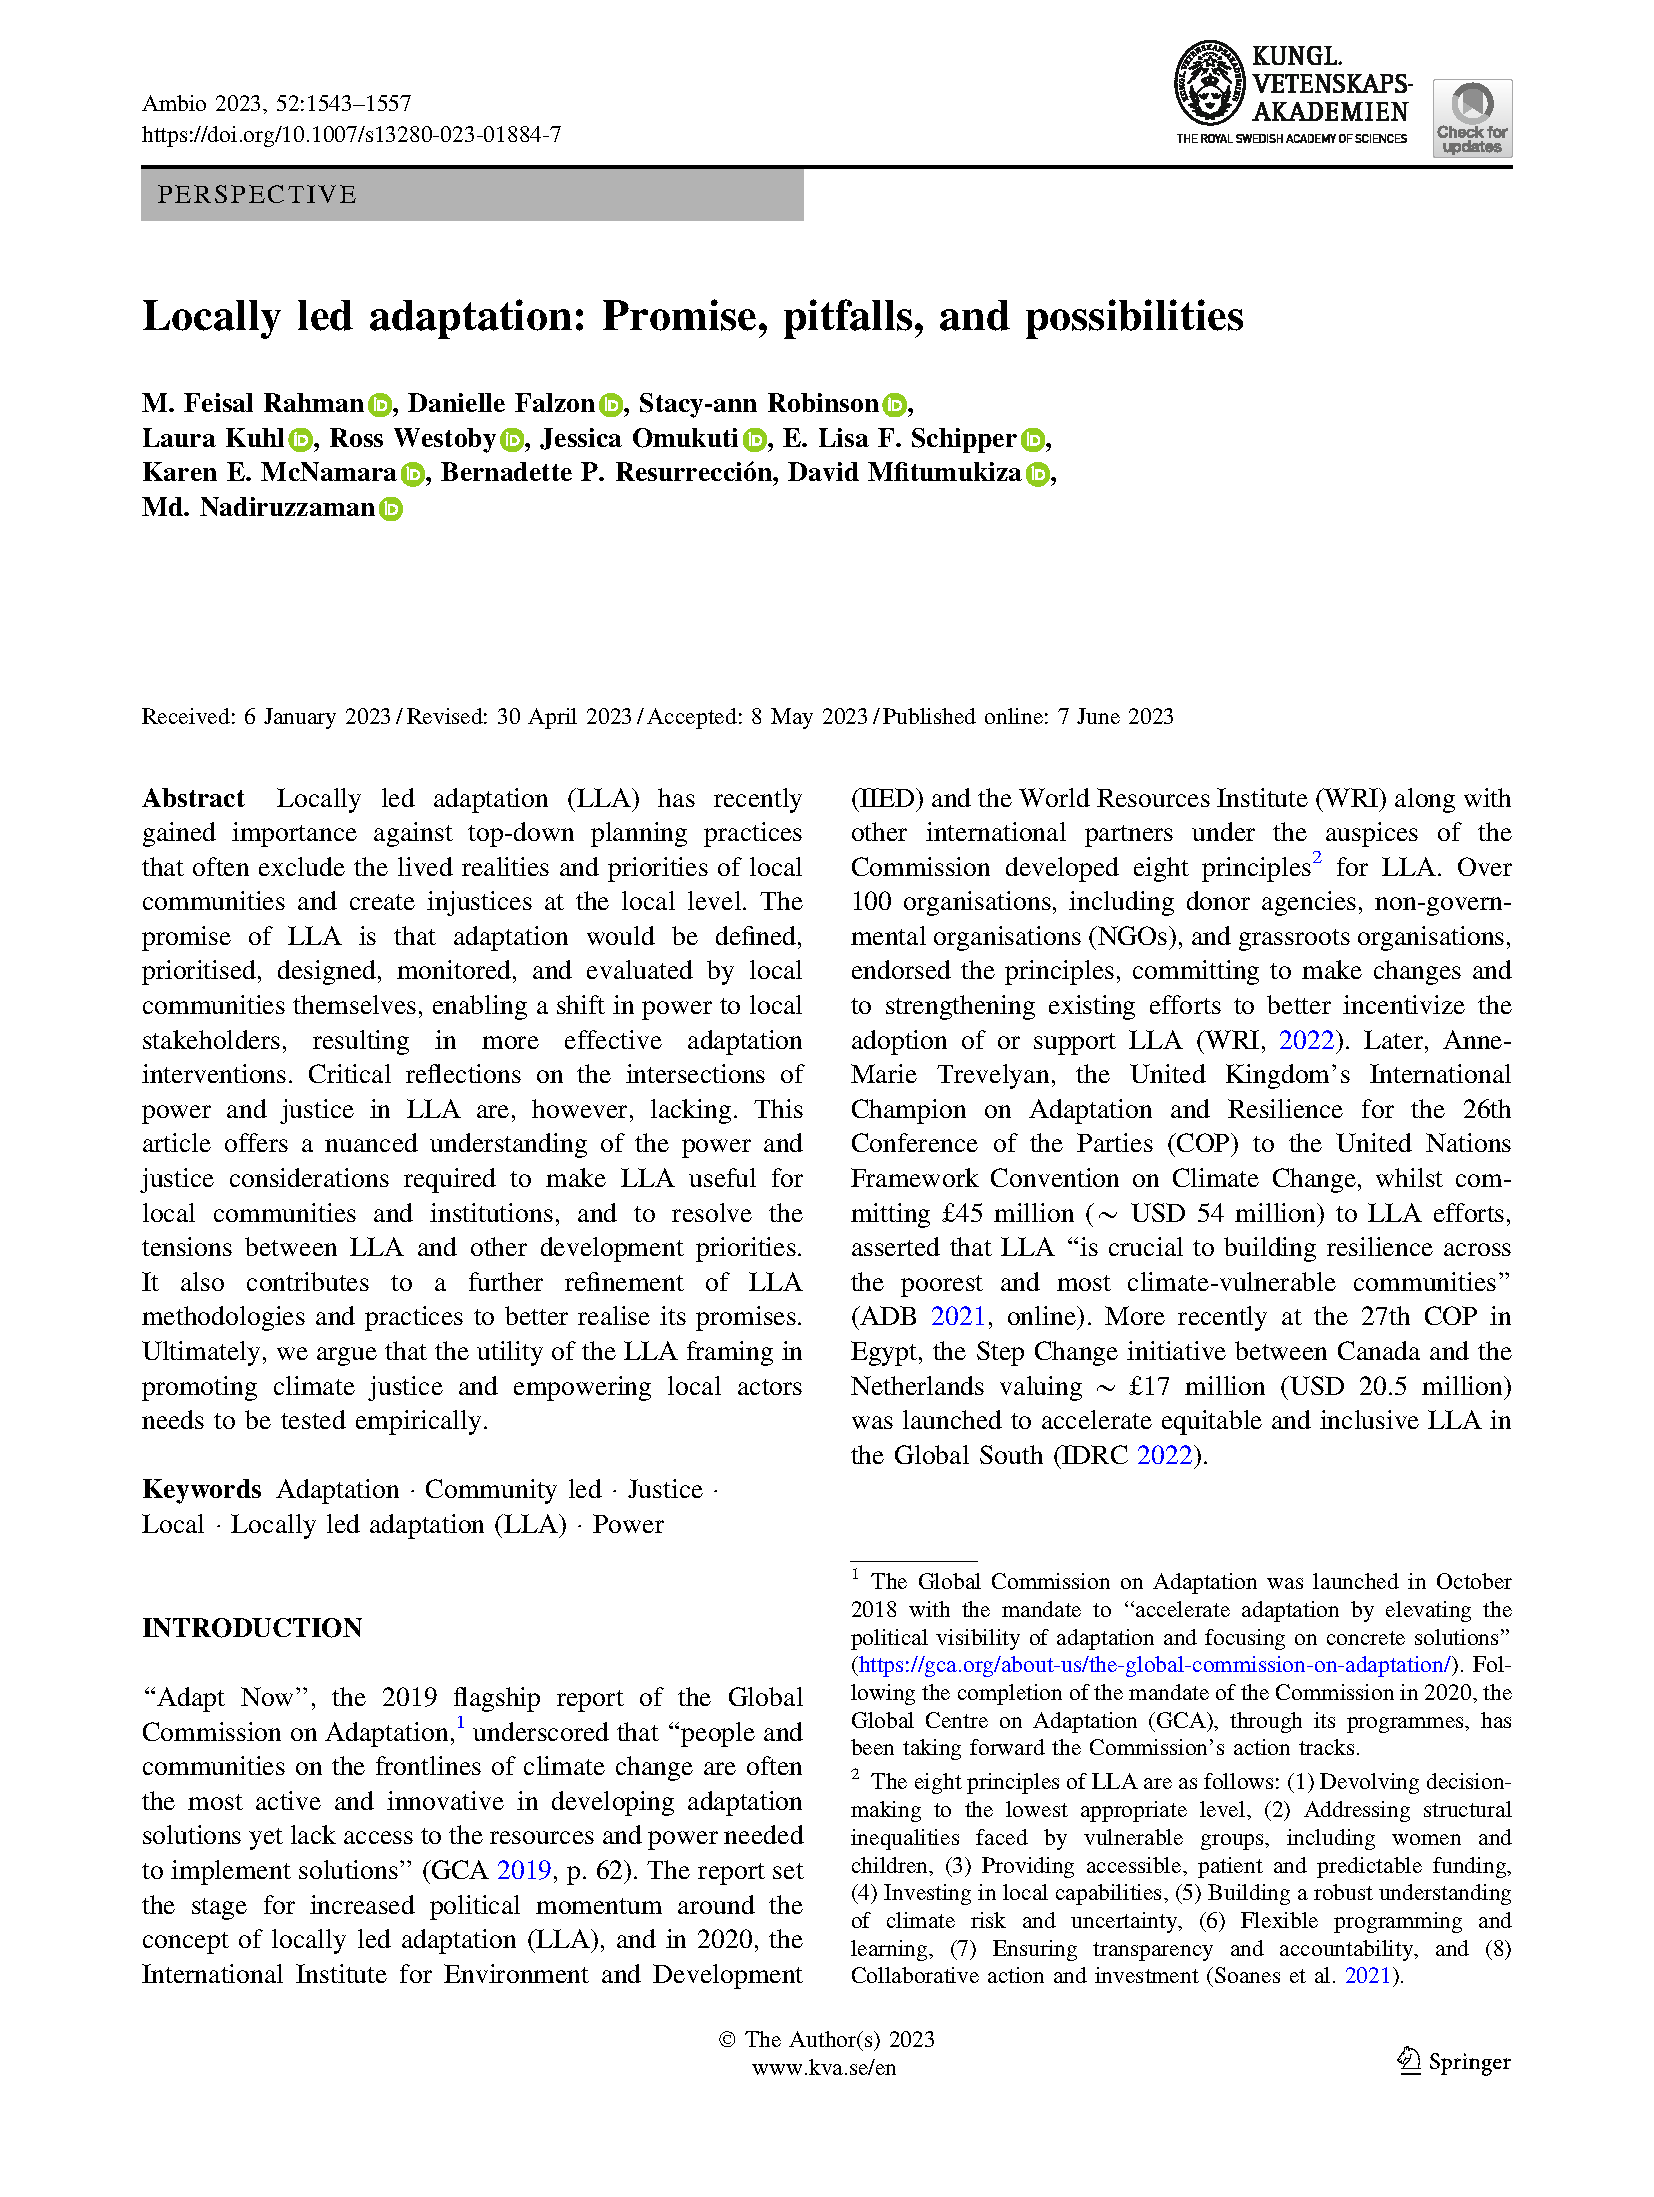 Cover page for Locally Led Adaptation: Promise, Pitfalls, and Possibilities